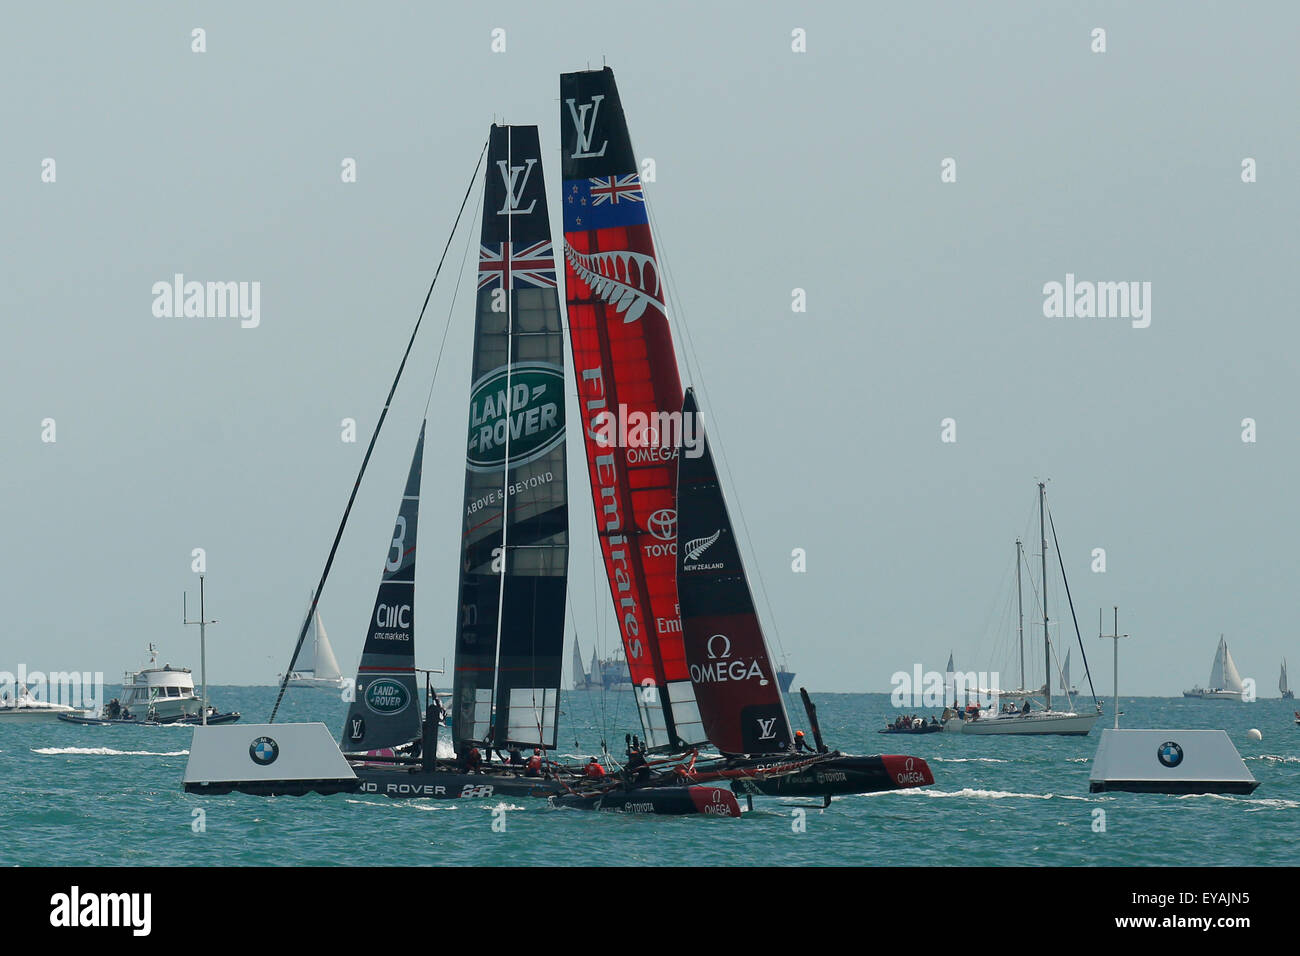 Portsmouth, UK. 25th July, 2015. Teams: Emirates New Zealand (R) and Britain's Land Rover BAR (Ben Ainslie Racing) compete in the first official race of the 35th America's Cup World Series Races at Portsmouth in Hampshire, UK Saturday July 25, 2015. The 2015 Portsmouth racing of the Louis Vuitton America's Cup World Series counts towards the qualifiers and playoffs which determine the challenger to compete against the title holders Oracle Team USA in 2017. Credit:  Luke MacGregor/Alamy Live News Stock Photo